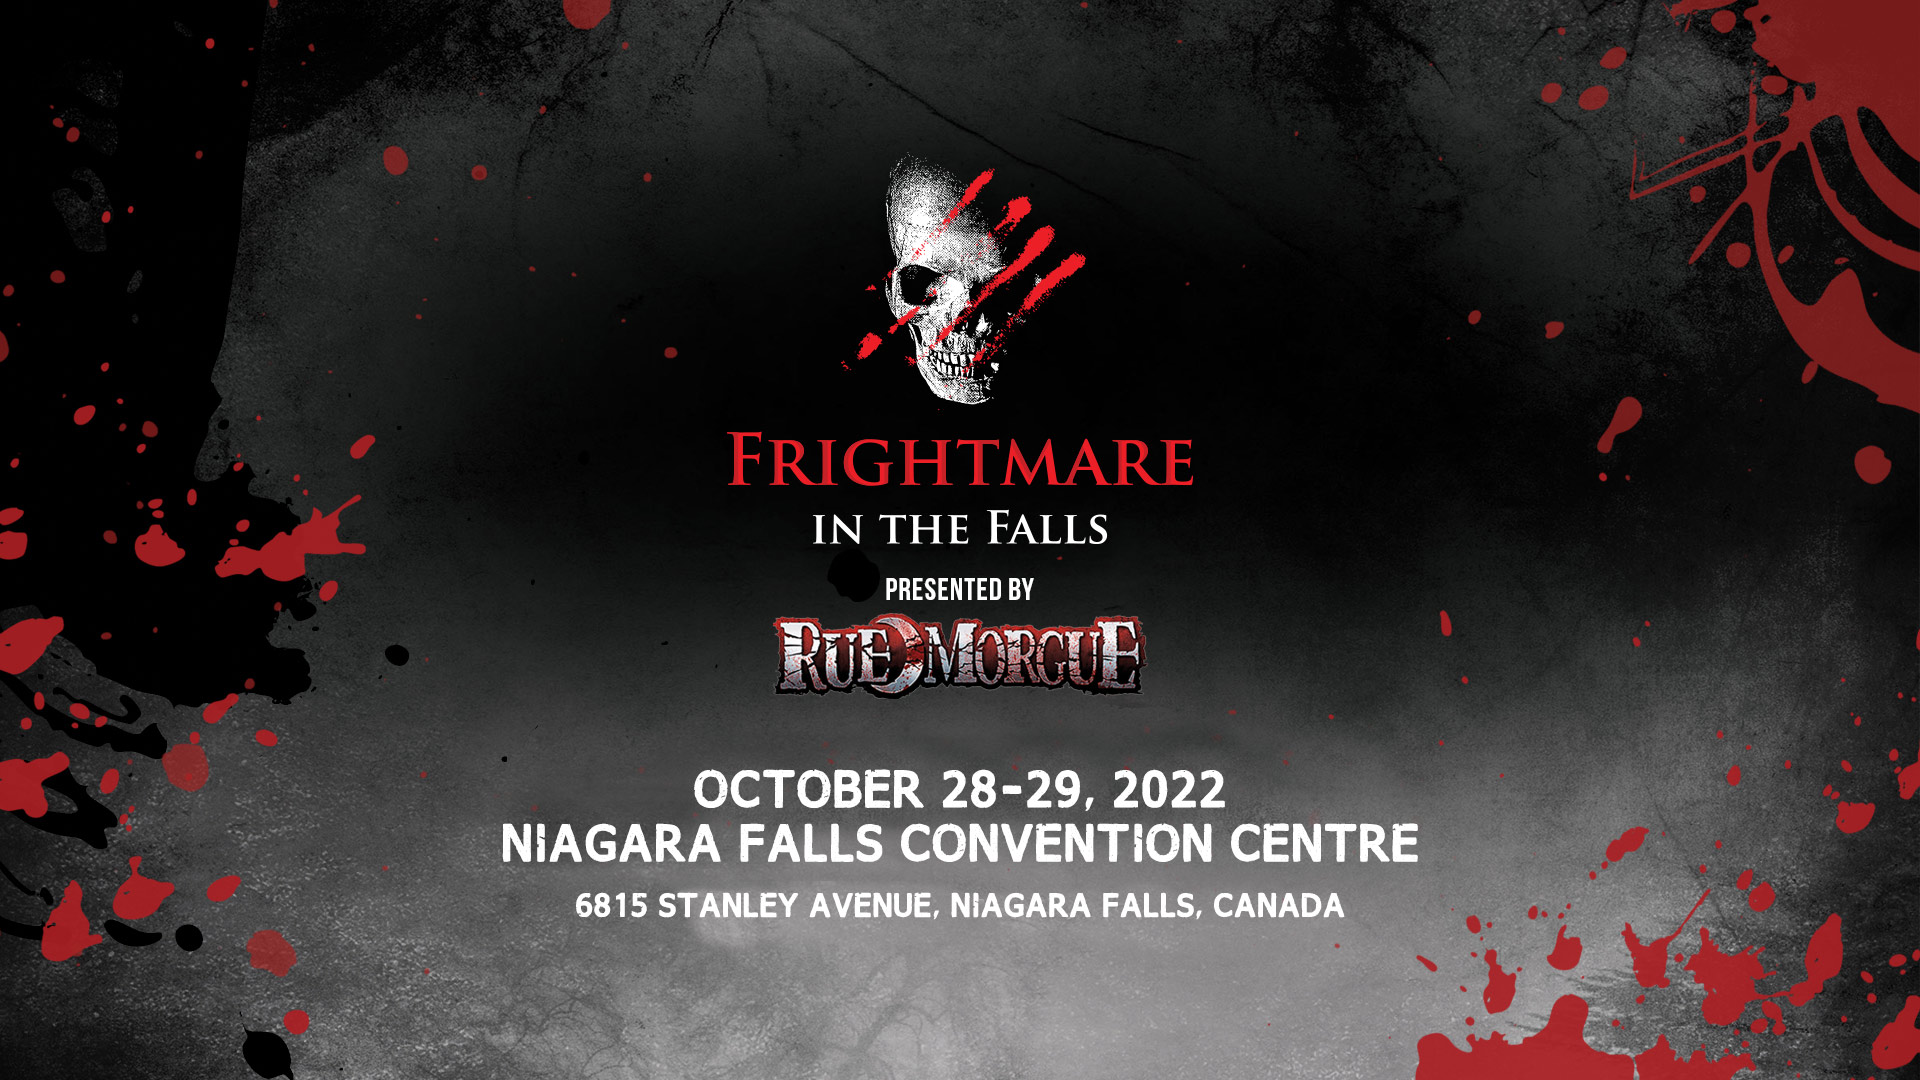 Frightmare in the Falls